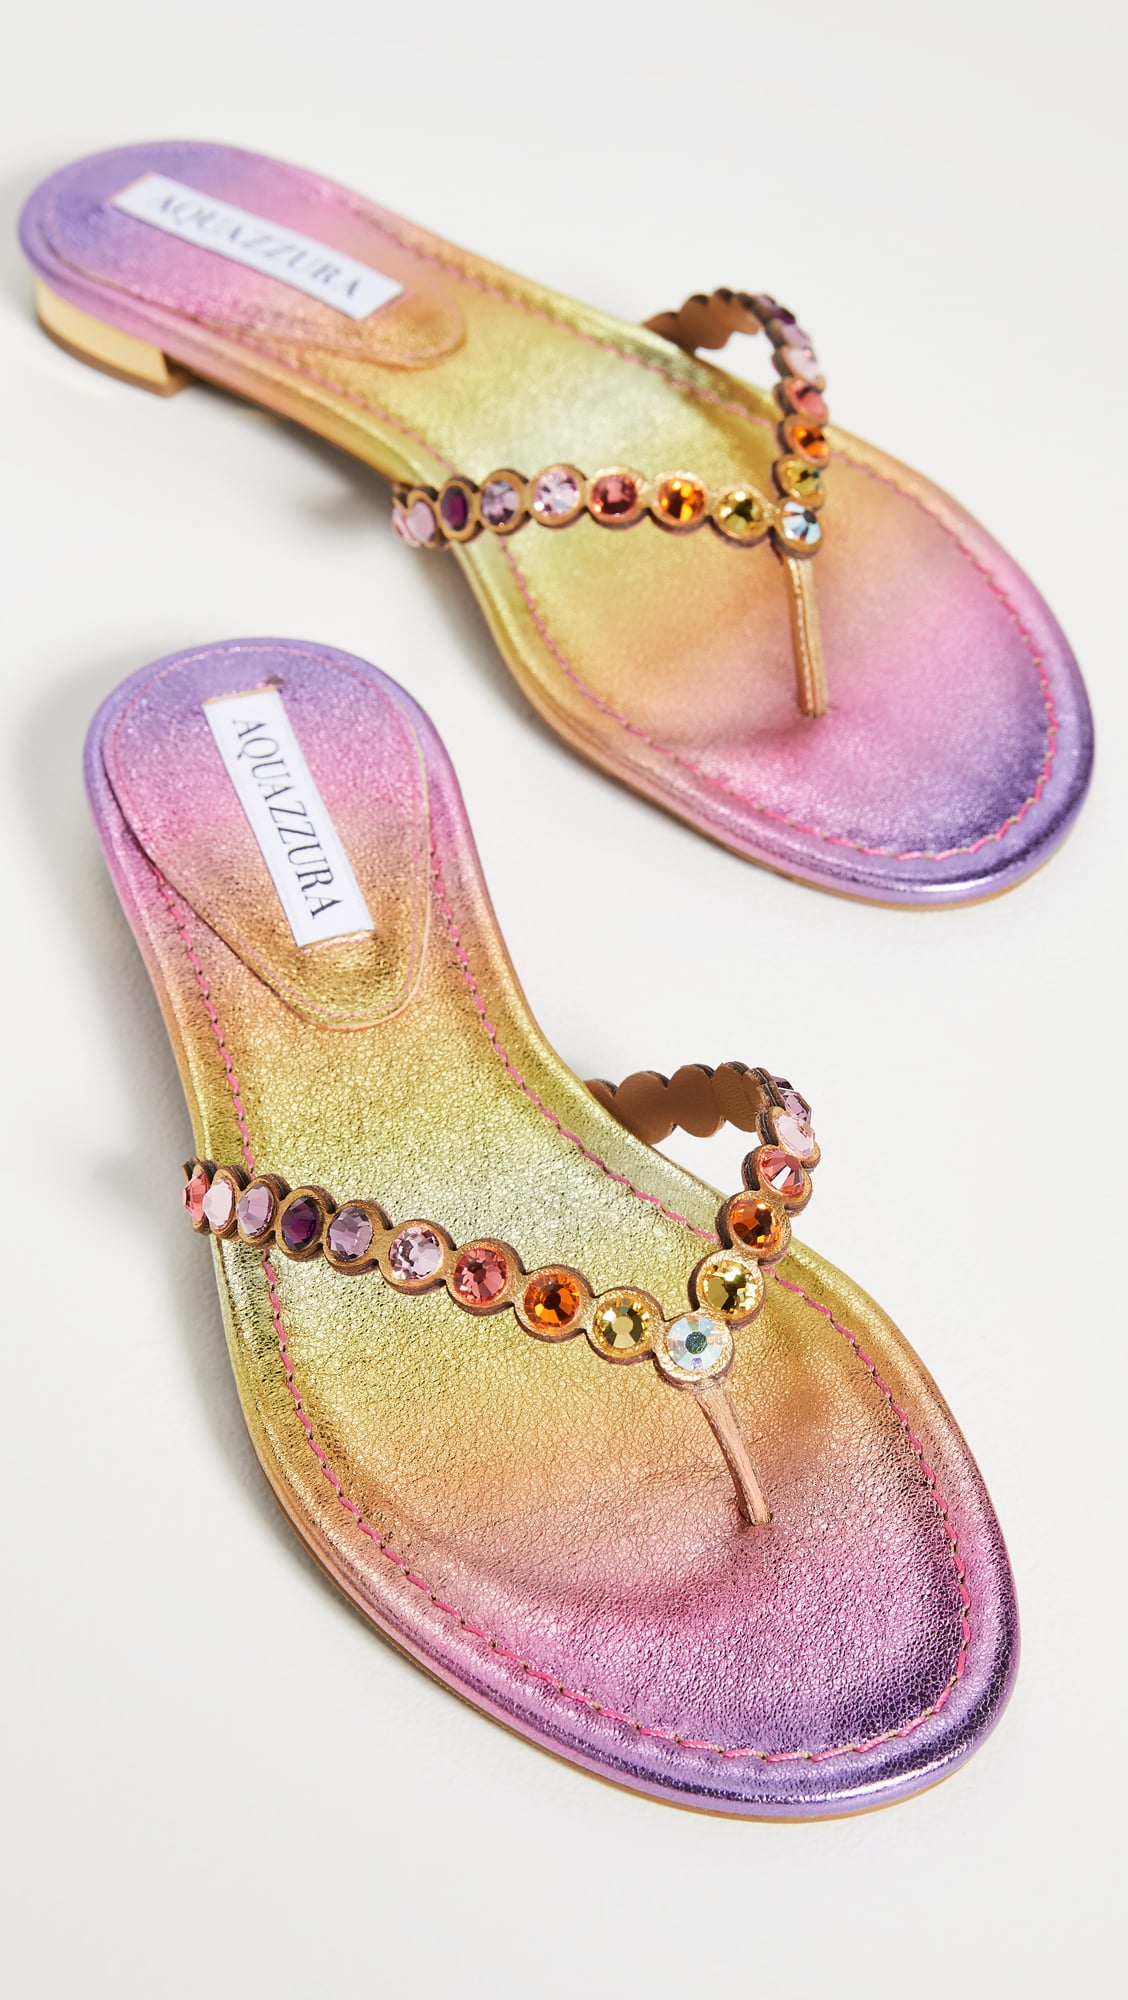 Aquazzura Tequila Flip Flops 8 Sandal Trends So Good You Re Bound To Collect Them All By Summer S End Popsugar Fashion Photo 79